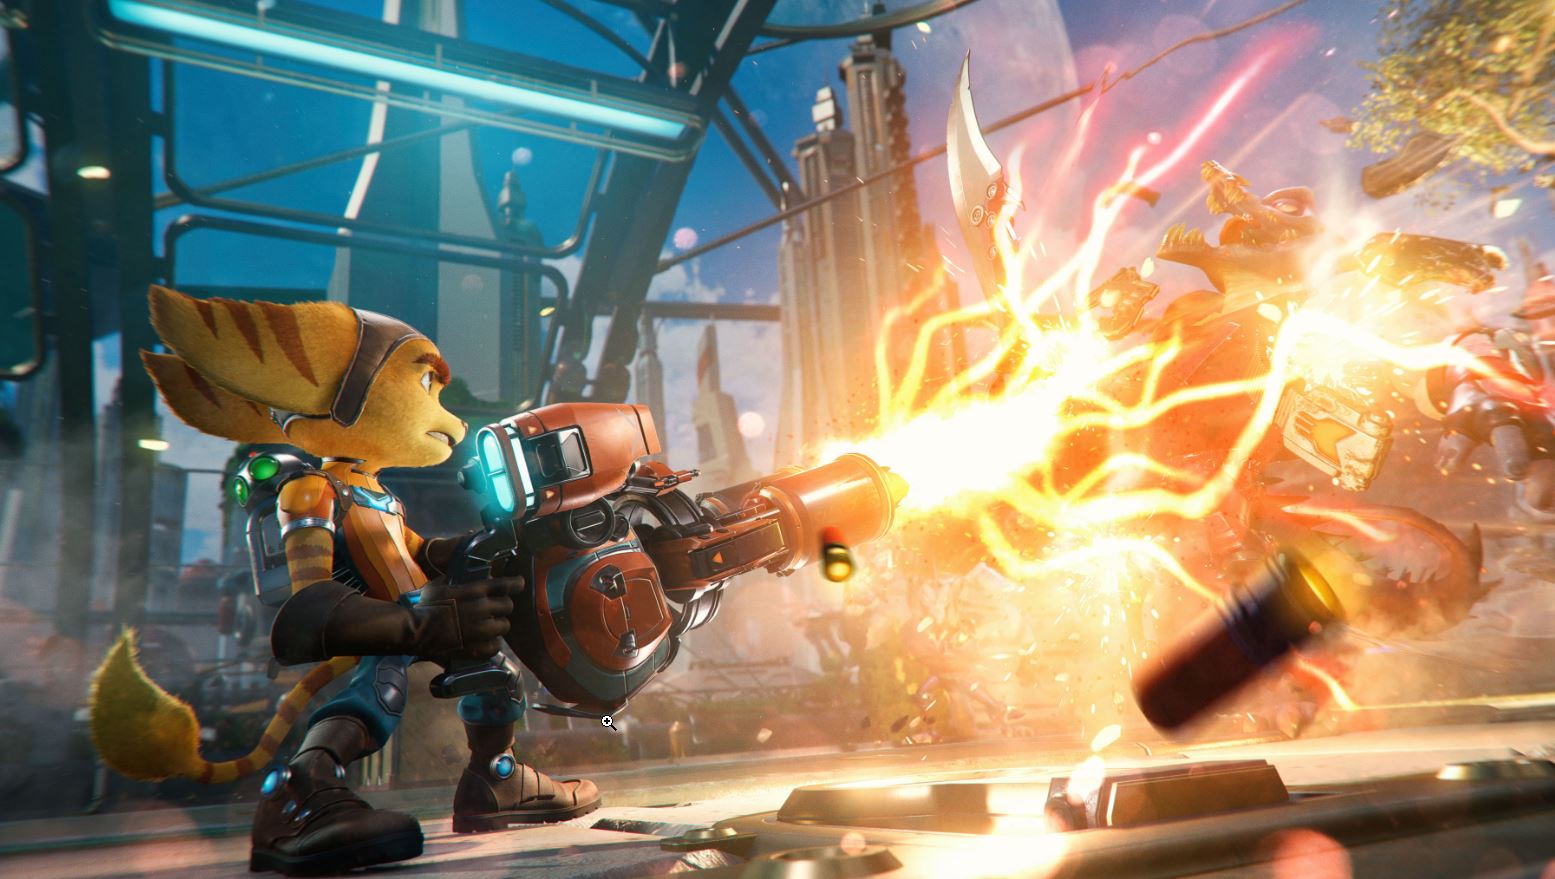 is-ratchet-and-clank-rift-apart-coming-to-ps4.jpg